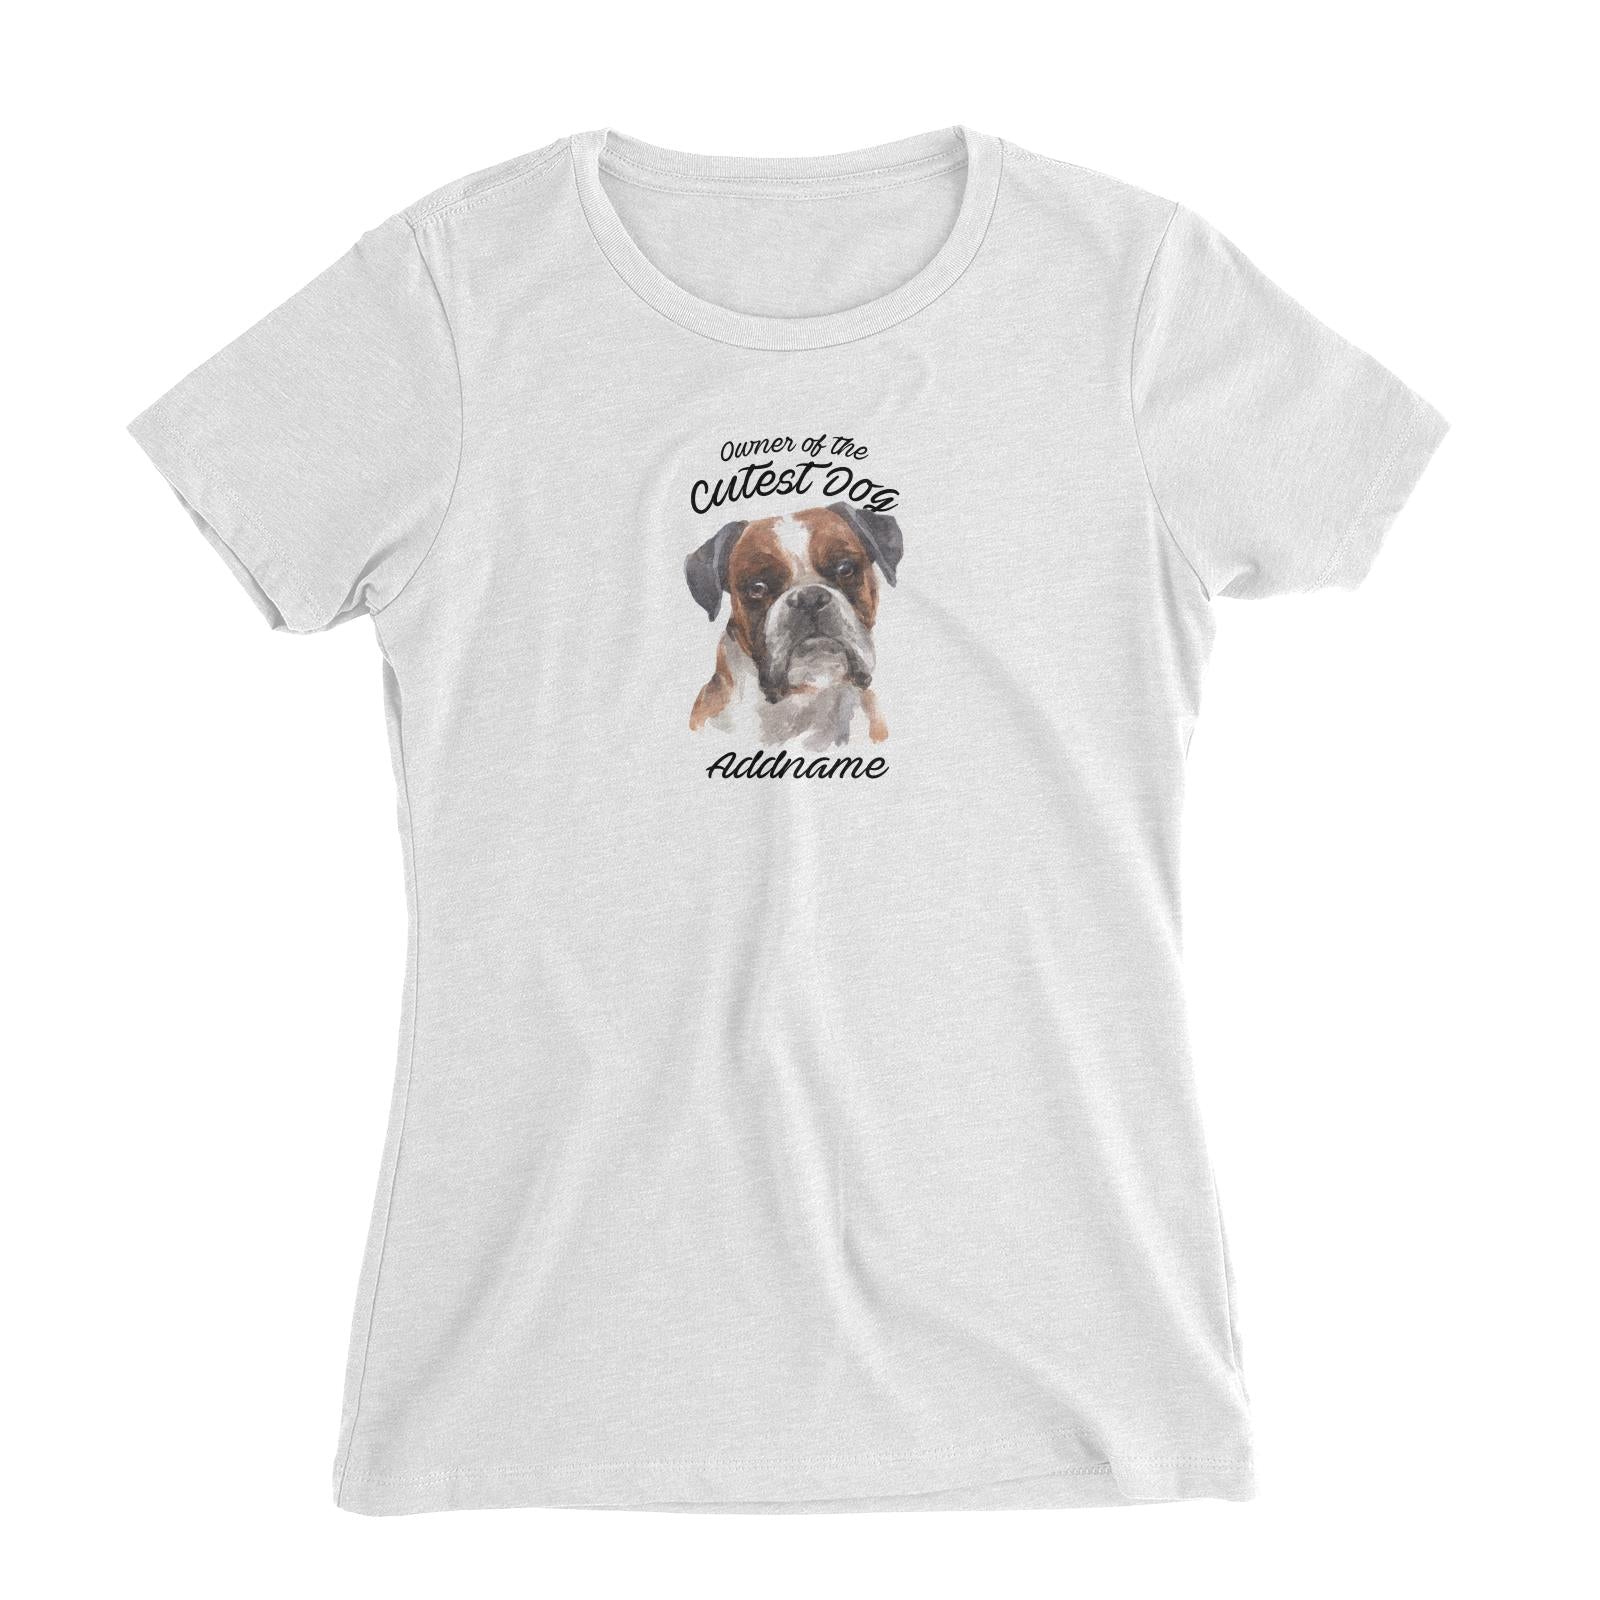 Watercolor Dog Owner Of The Cutest Dog Boxer Black Ears Addname Women's Slim Fit T-Shirt